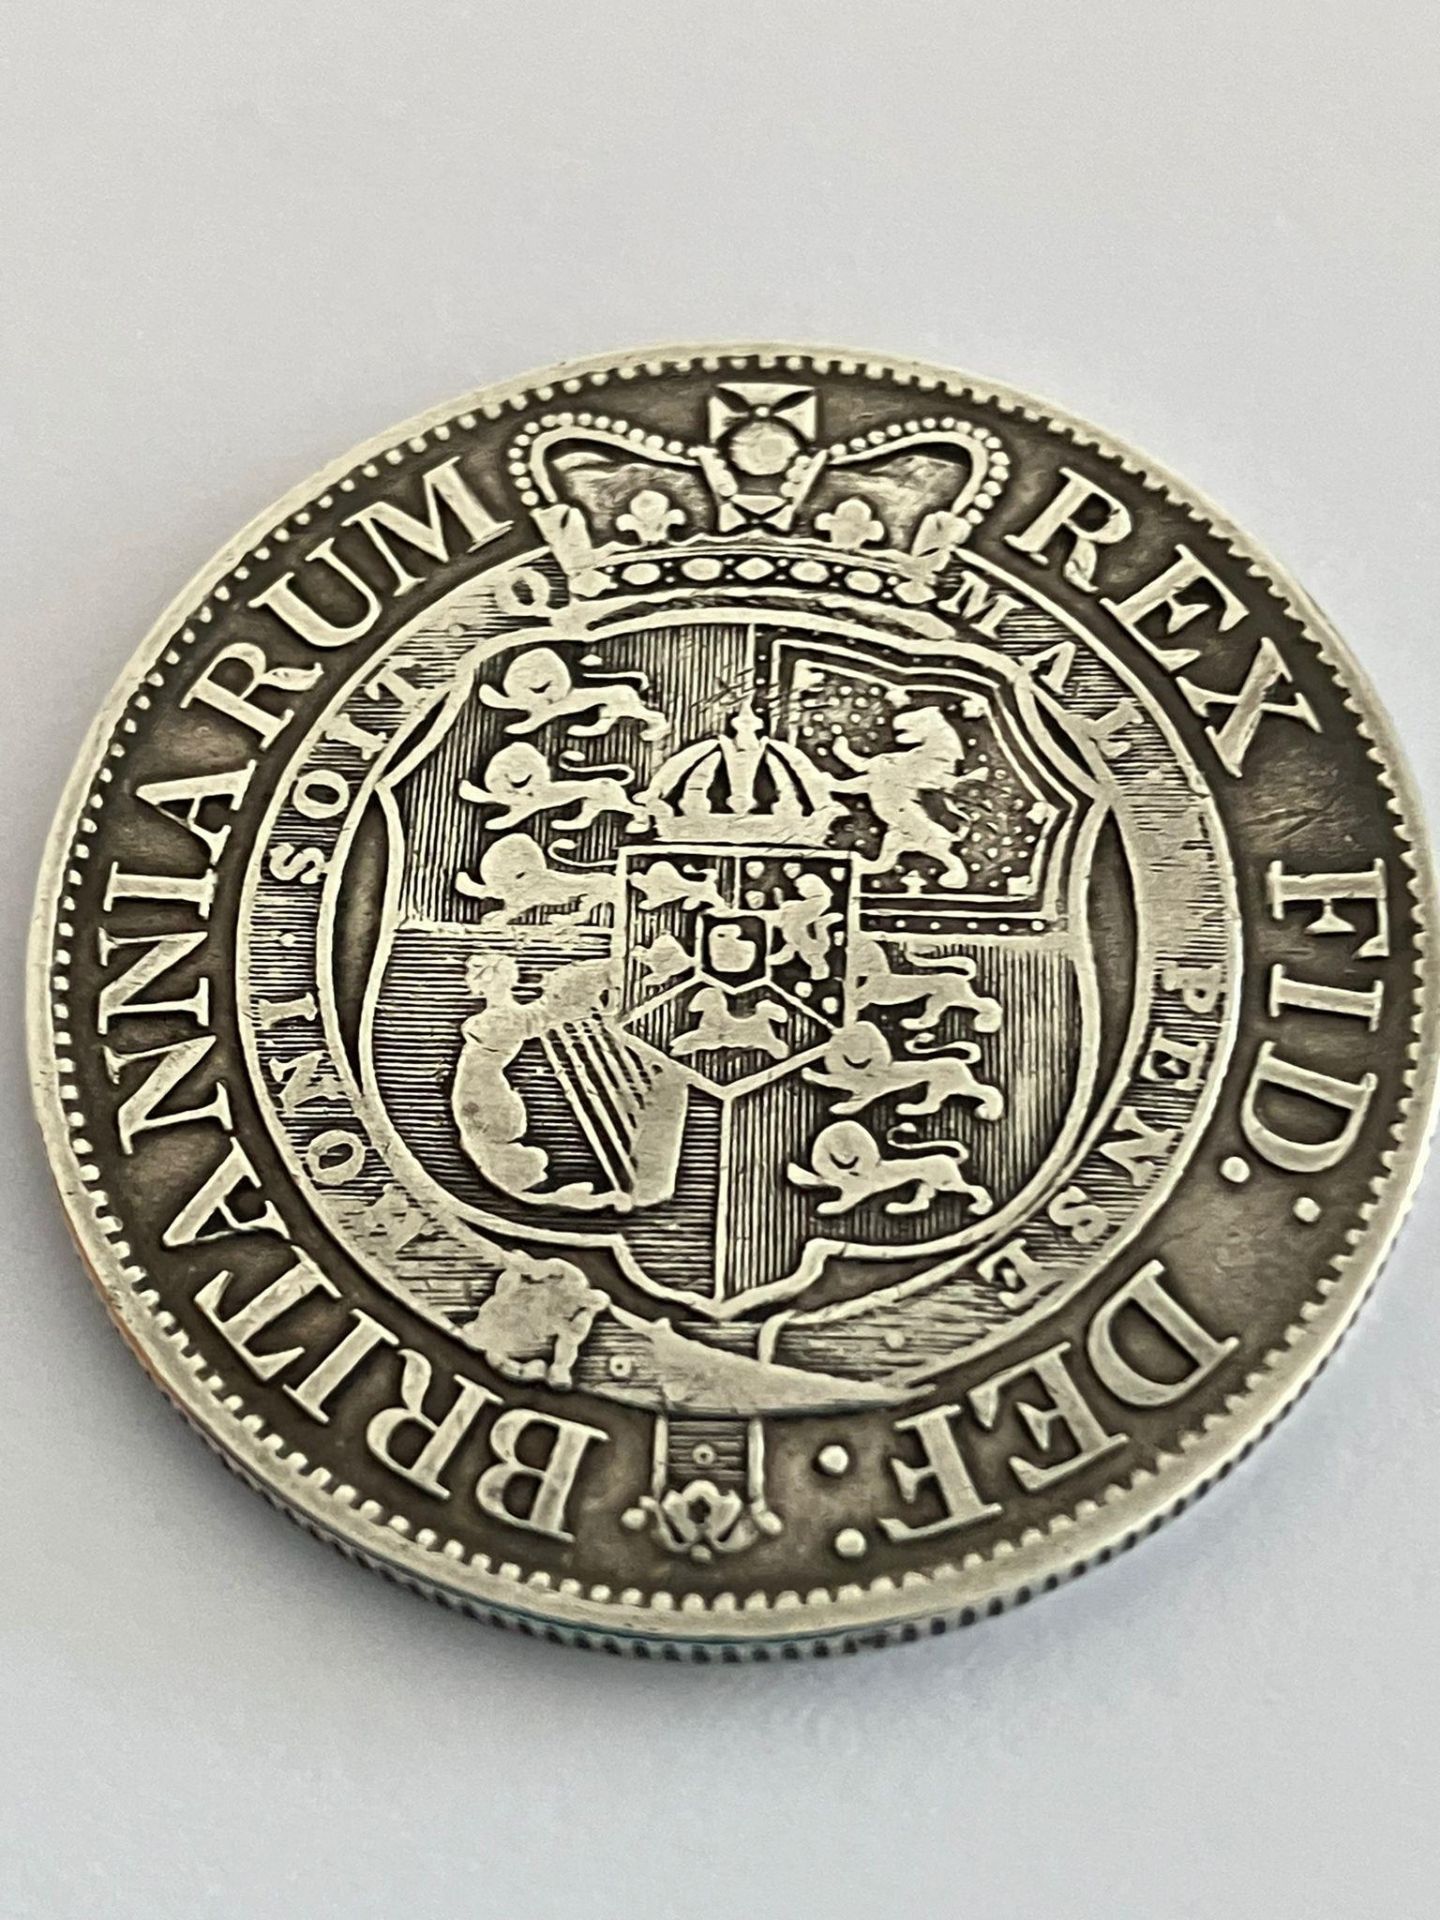 GEORGE III SILVER HALF CROWN 1819 in Very/extra fine condition. No spotting or shading. A high grade - Image 2 of 2